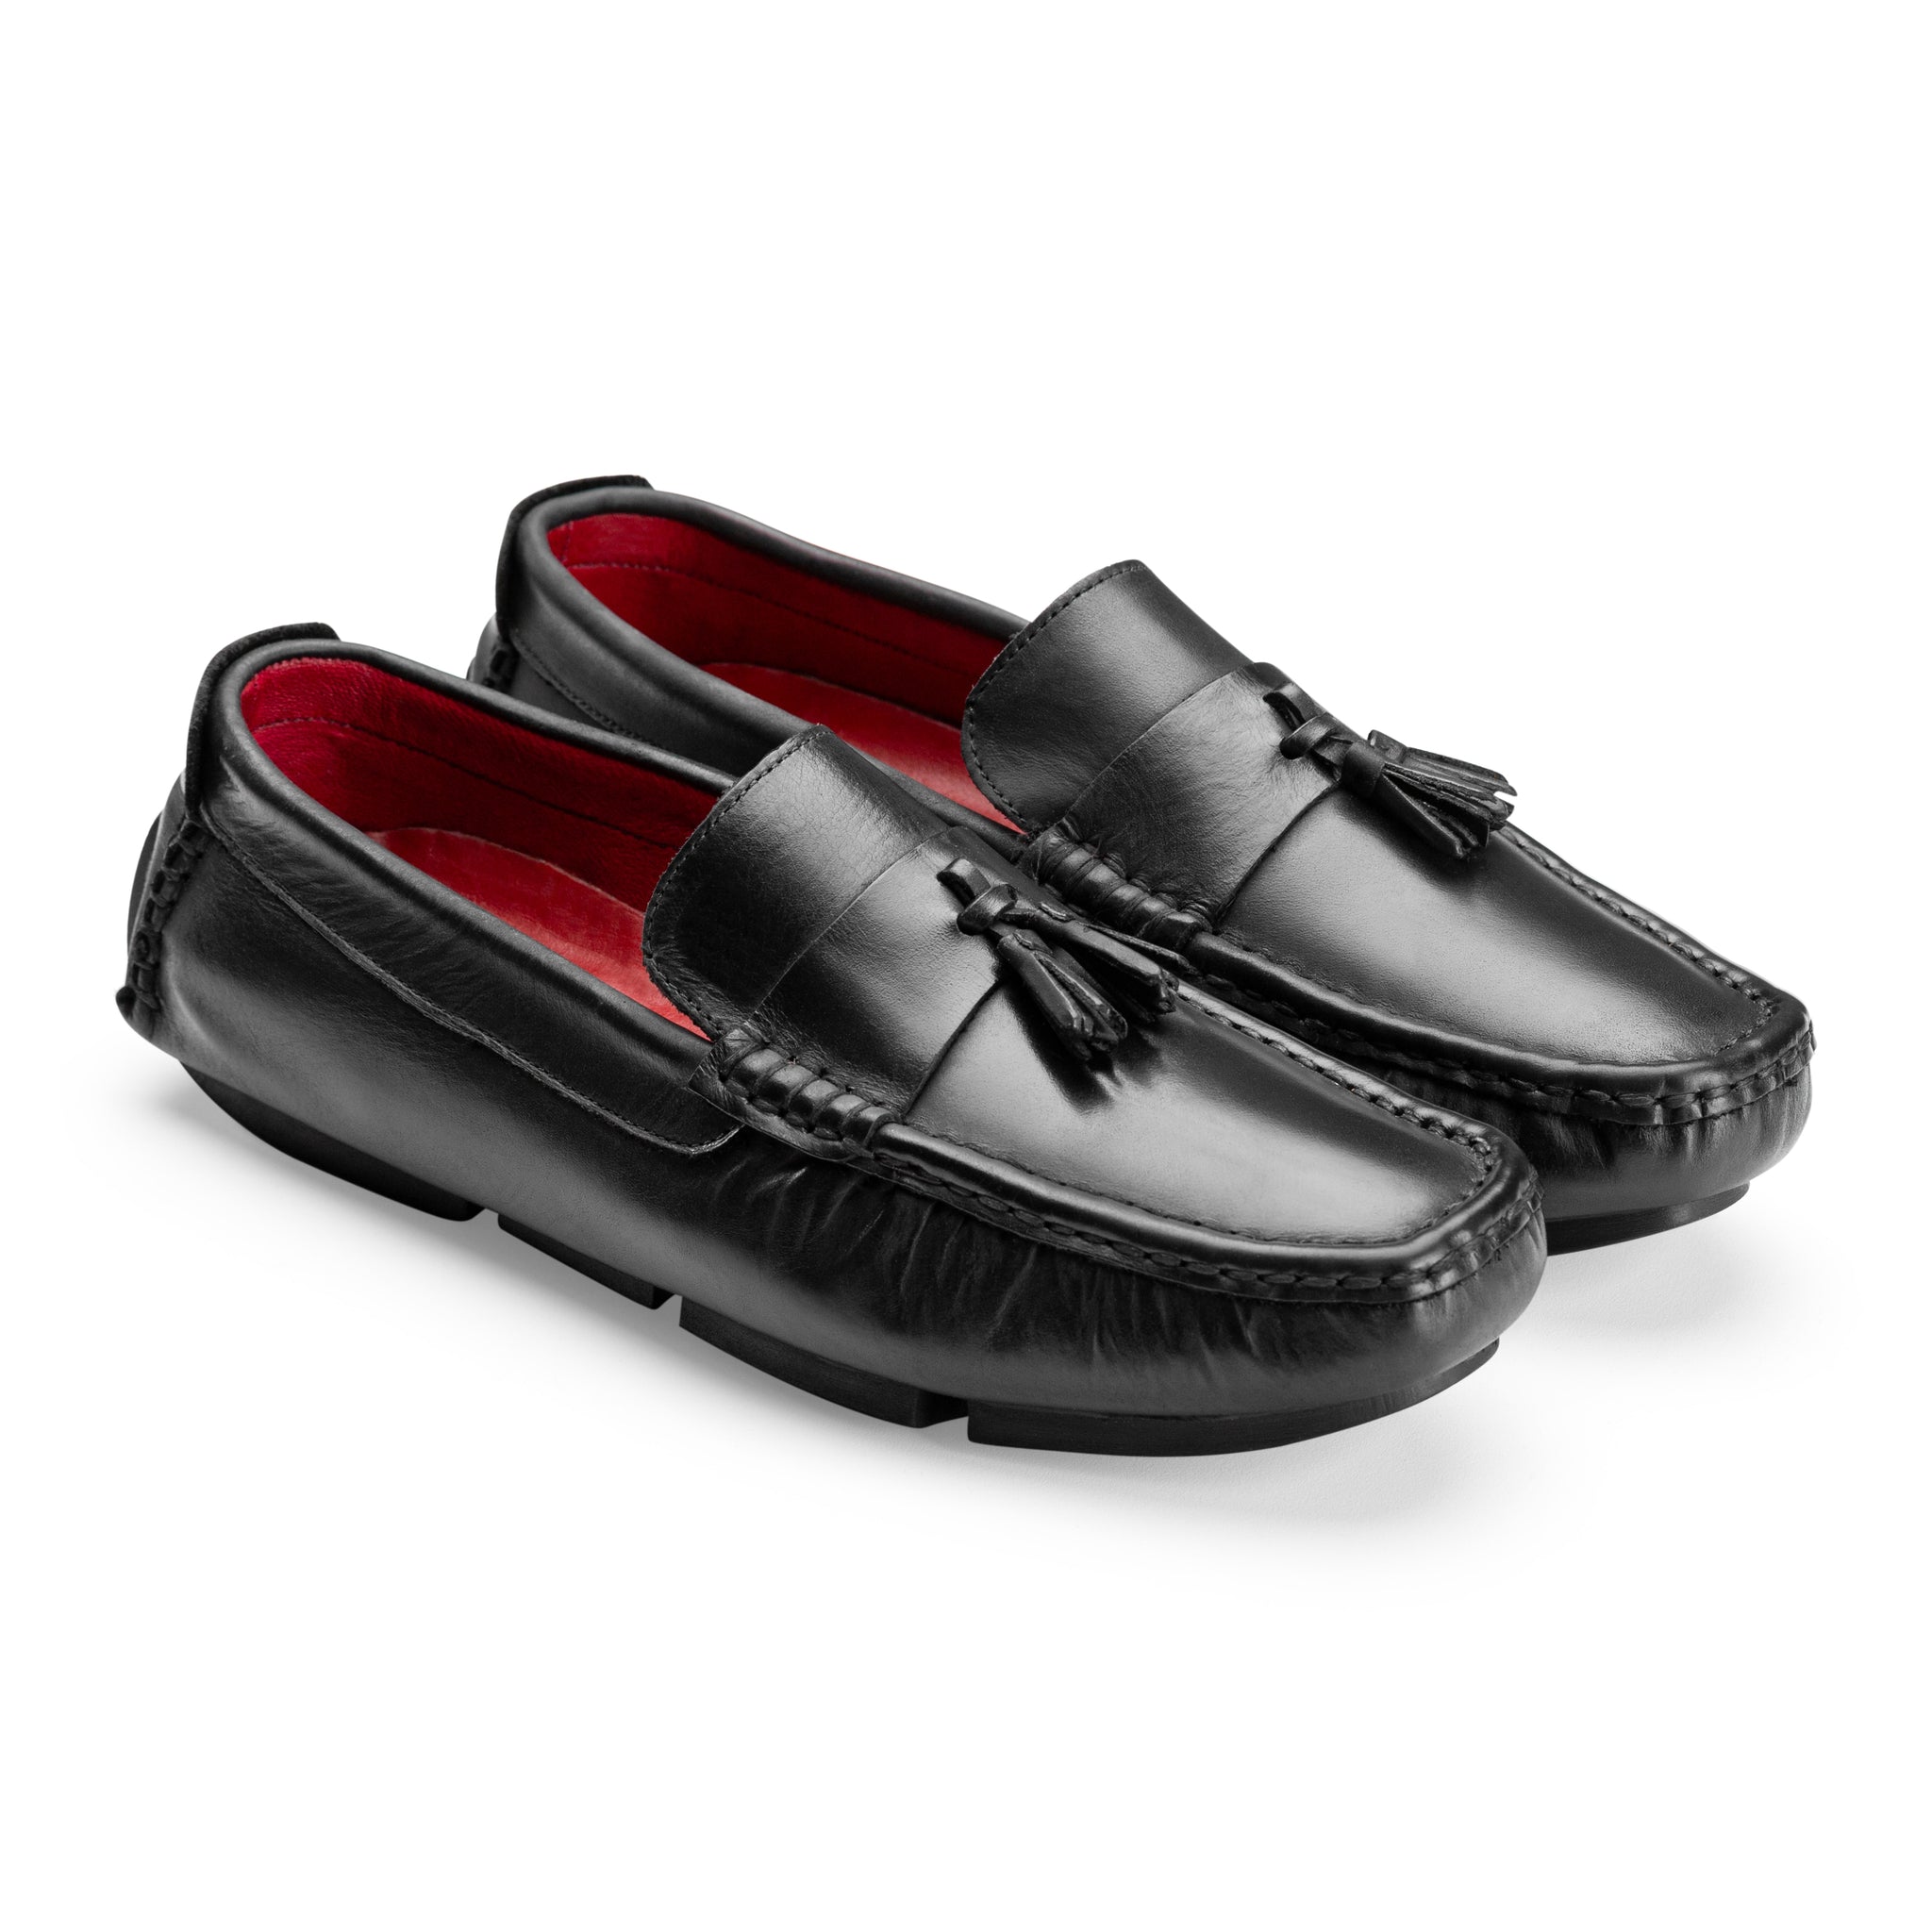 Moccasins | Suede calf leather rubber sole -black